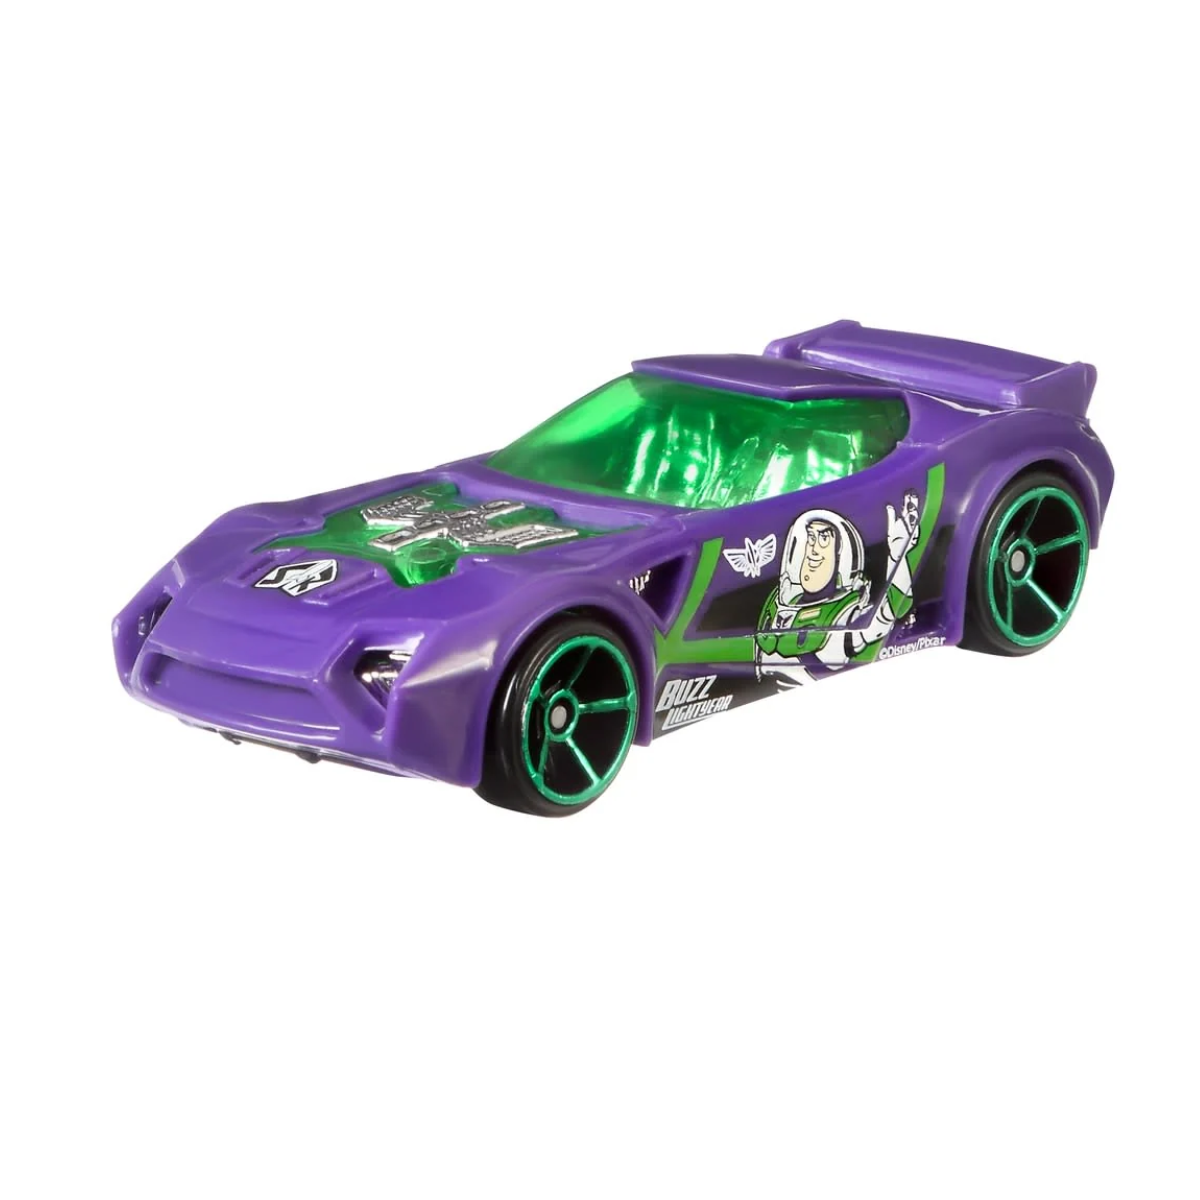 Entertainment Scale Cars 1:64